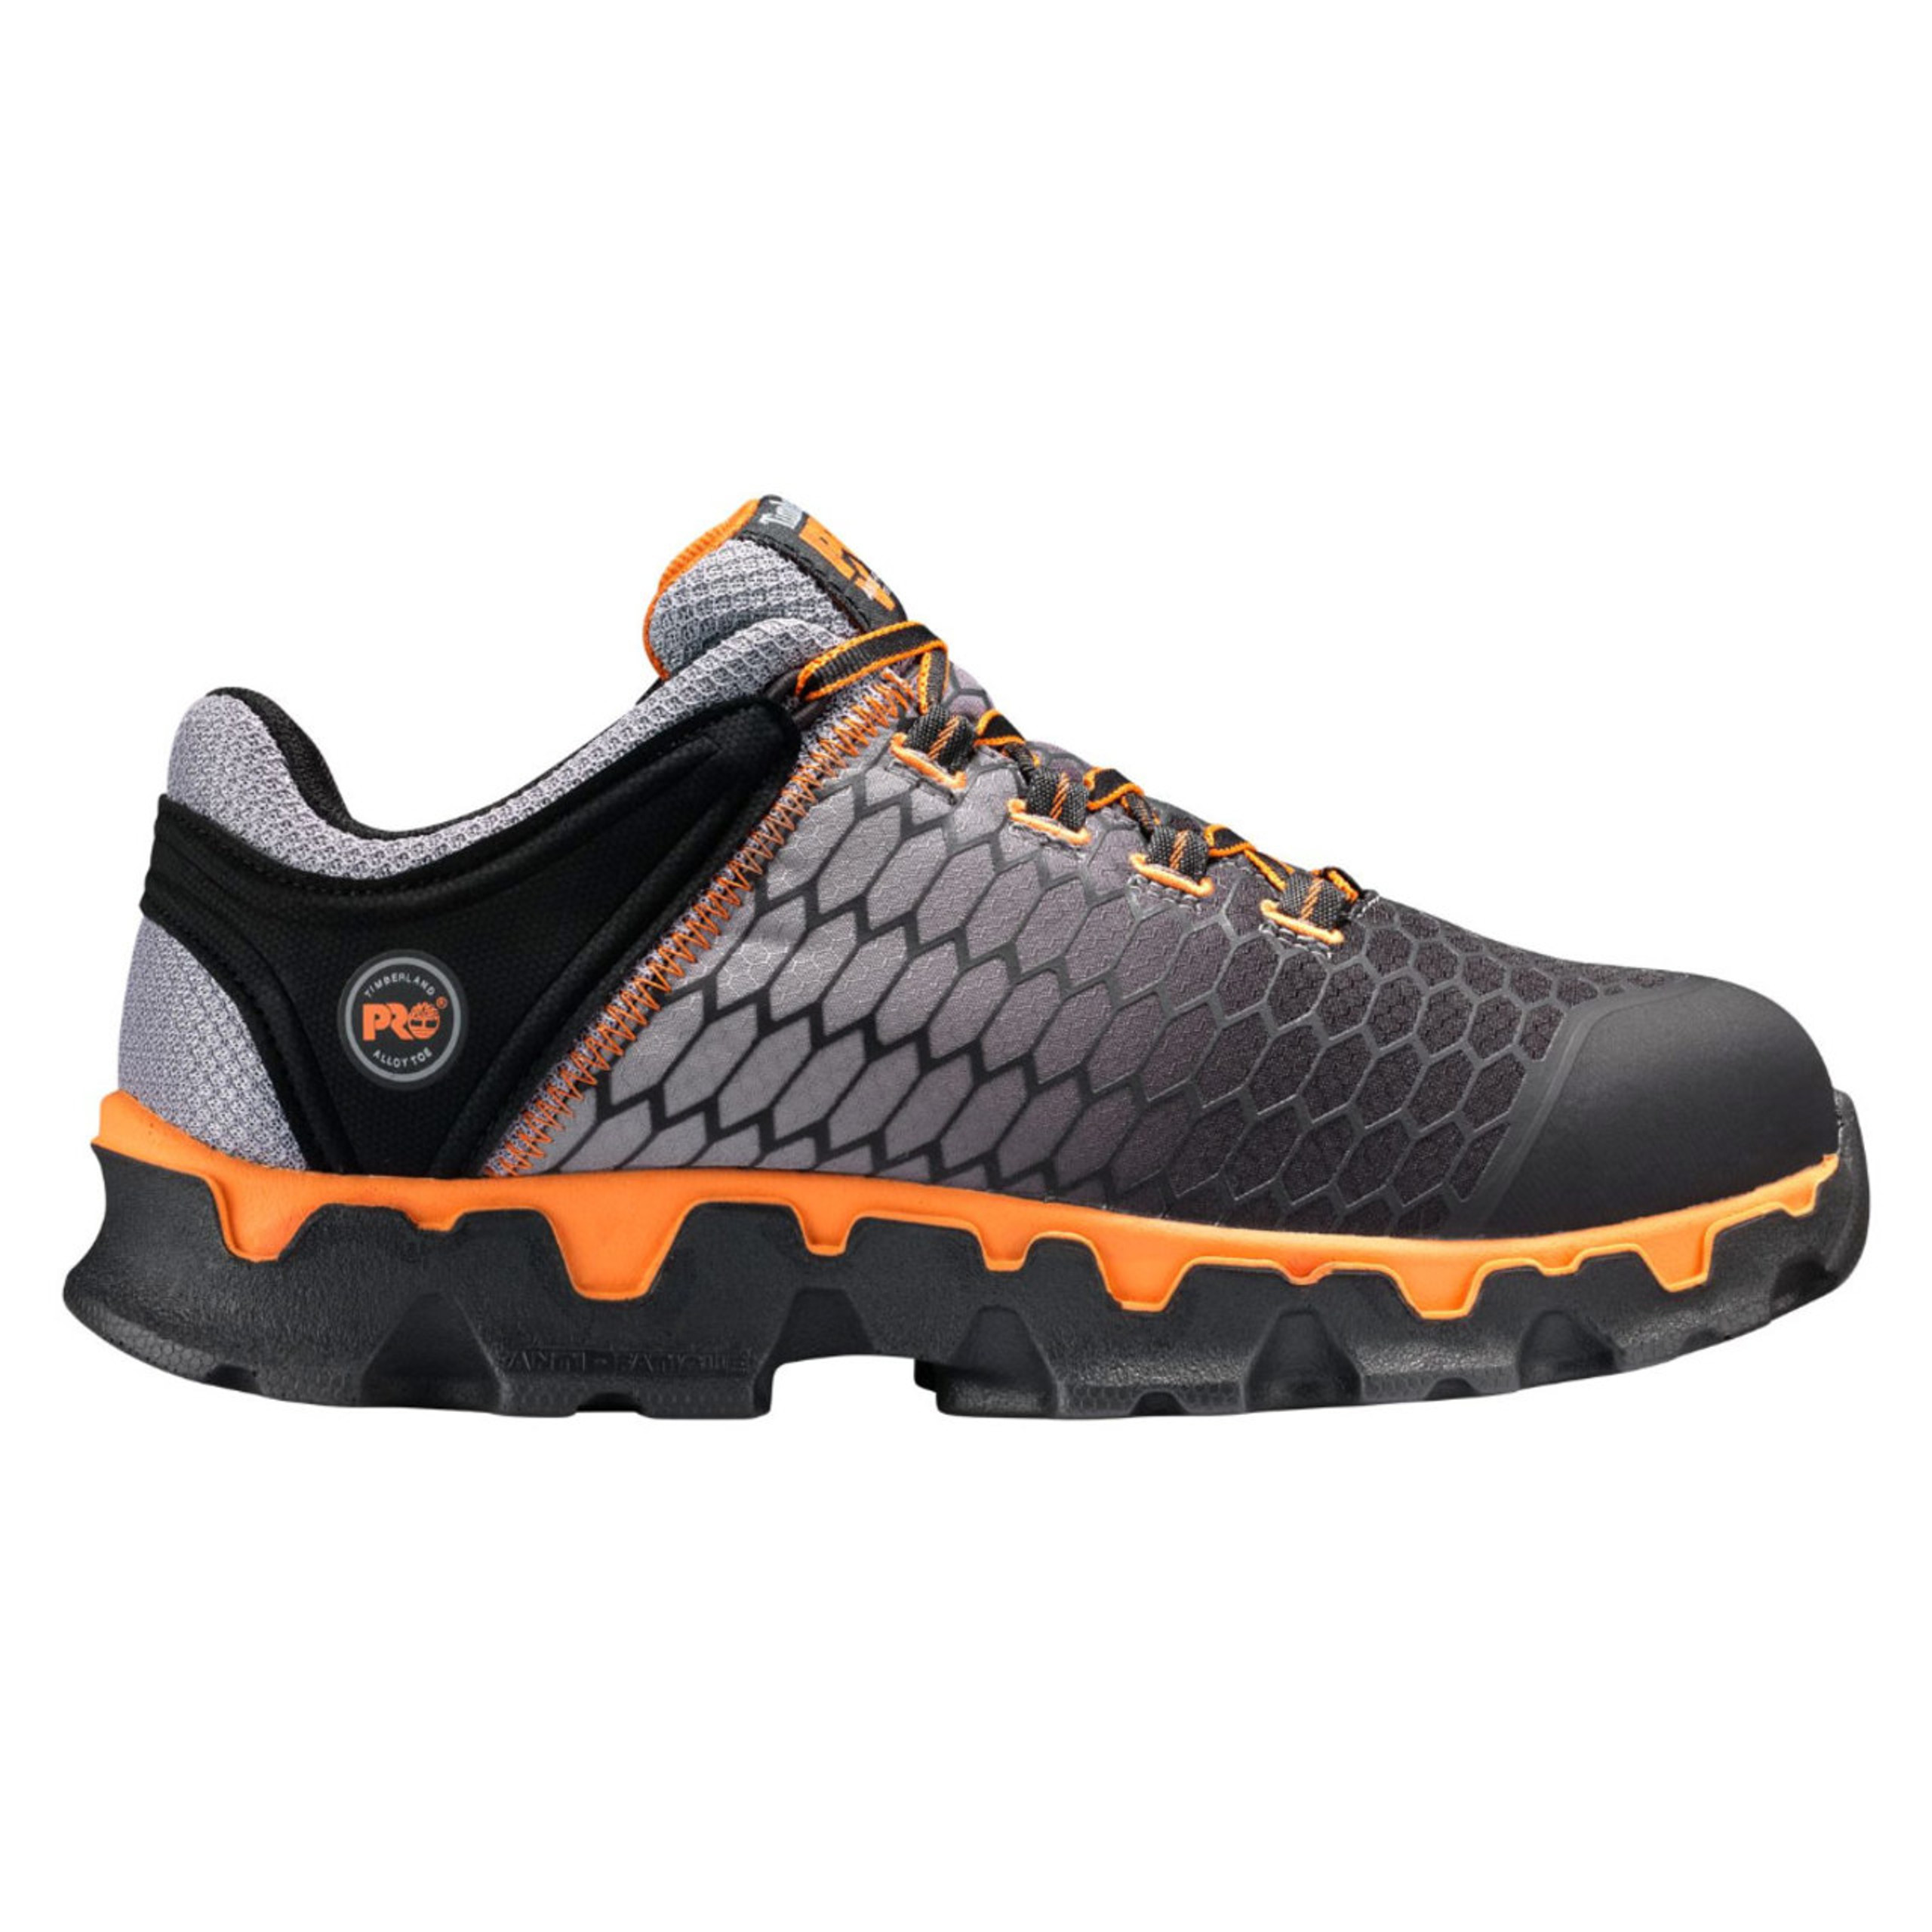 Timberland PRO Men's Powertrain Sport SD Alloy Safety Toe Athletic ...